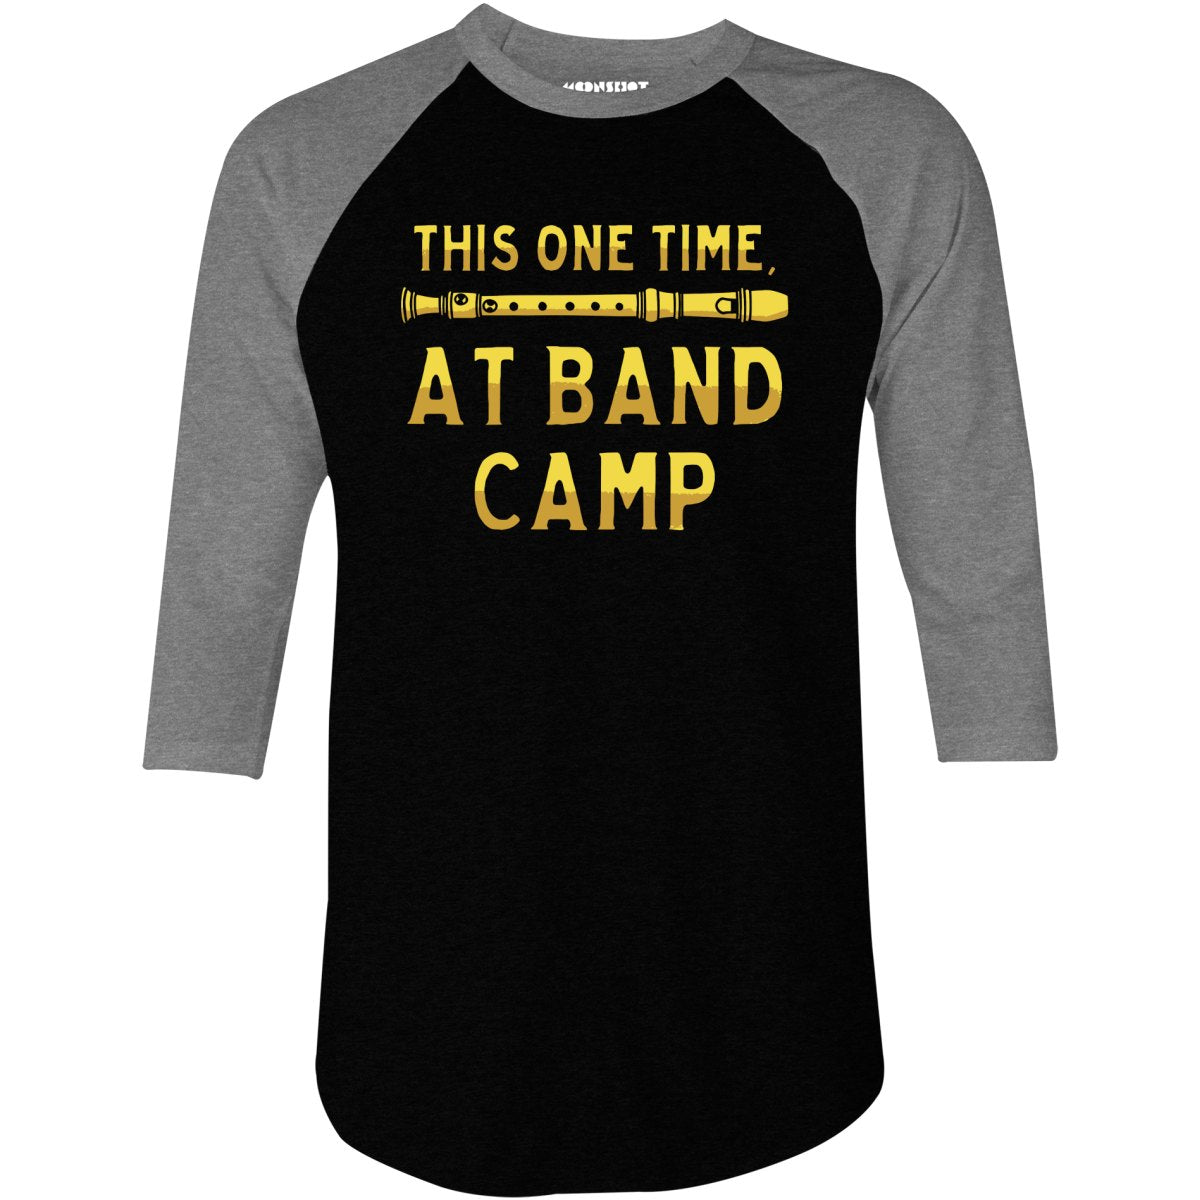 This One Time, at Band Camp - 3/4 Sleeve Raglan T-Shirt